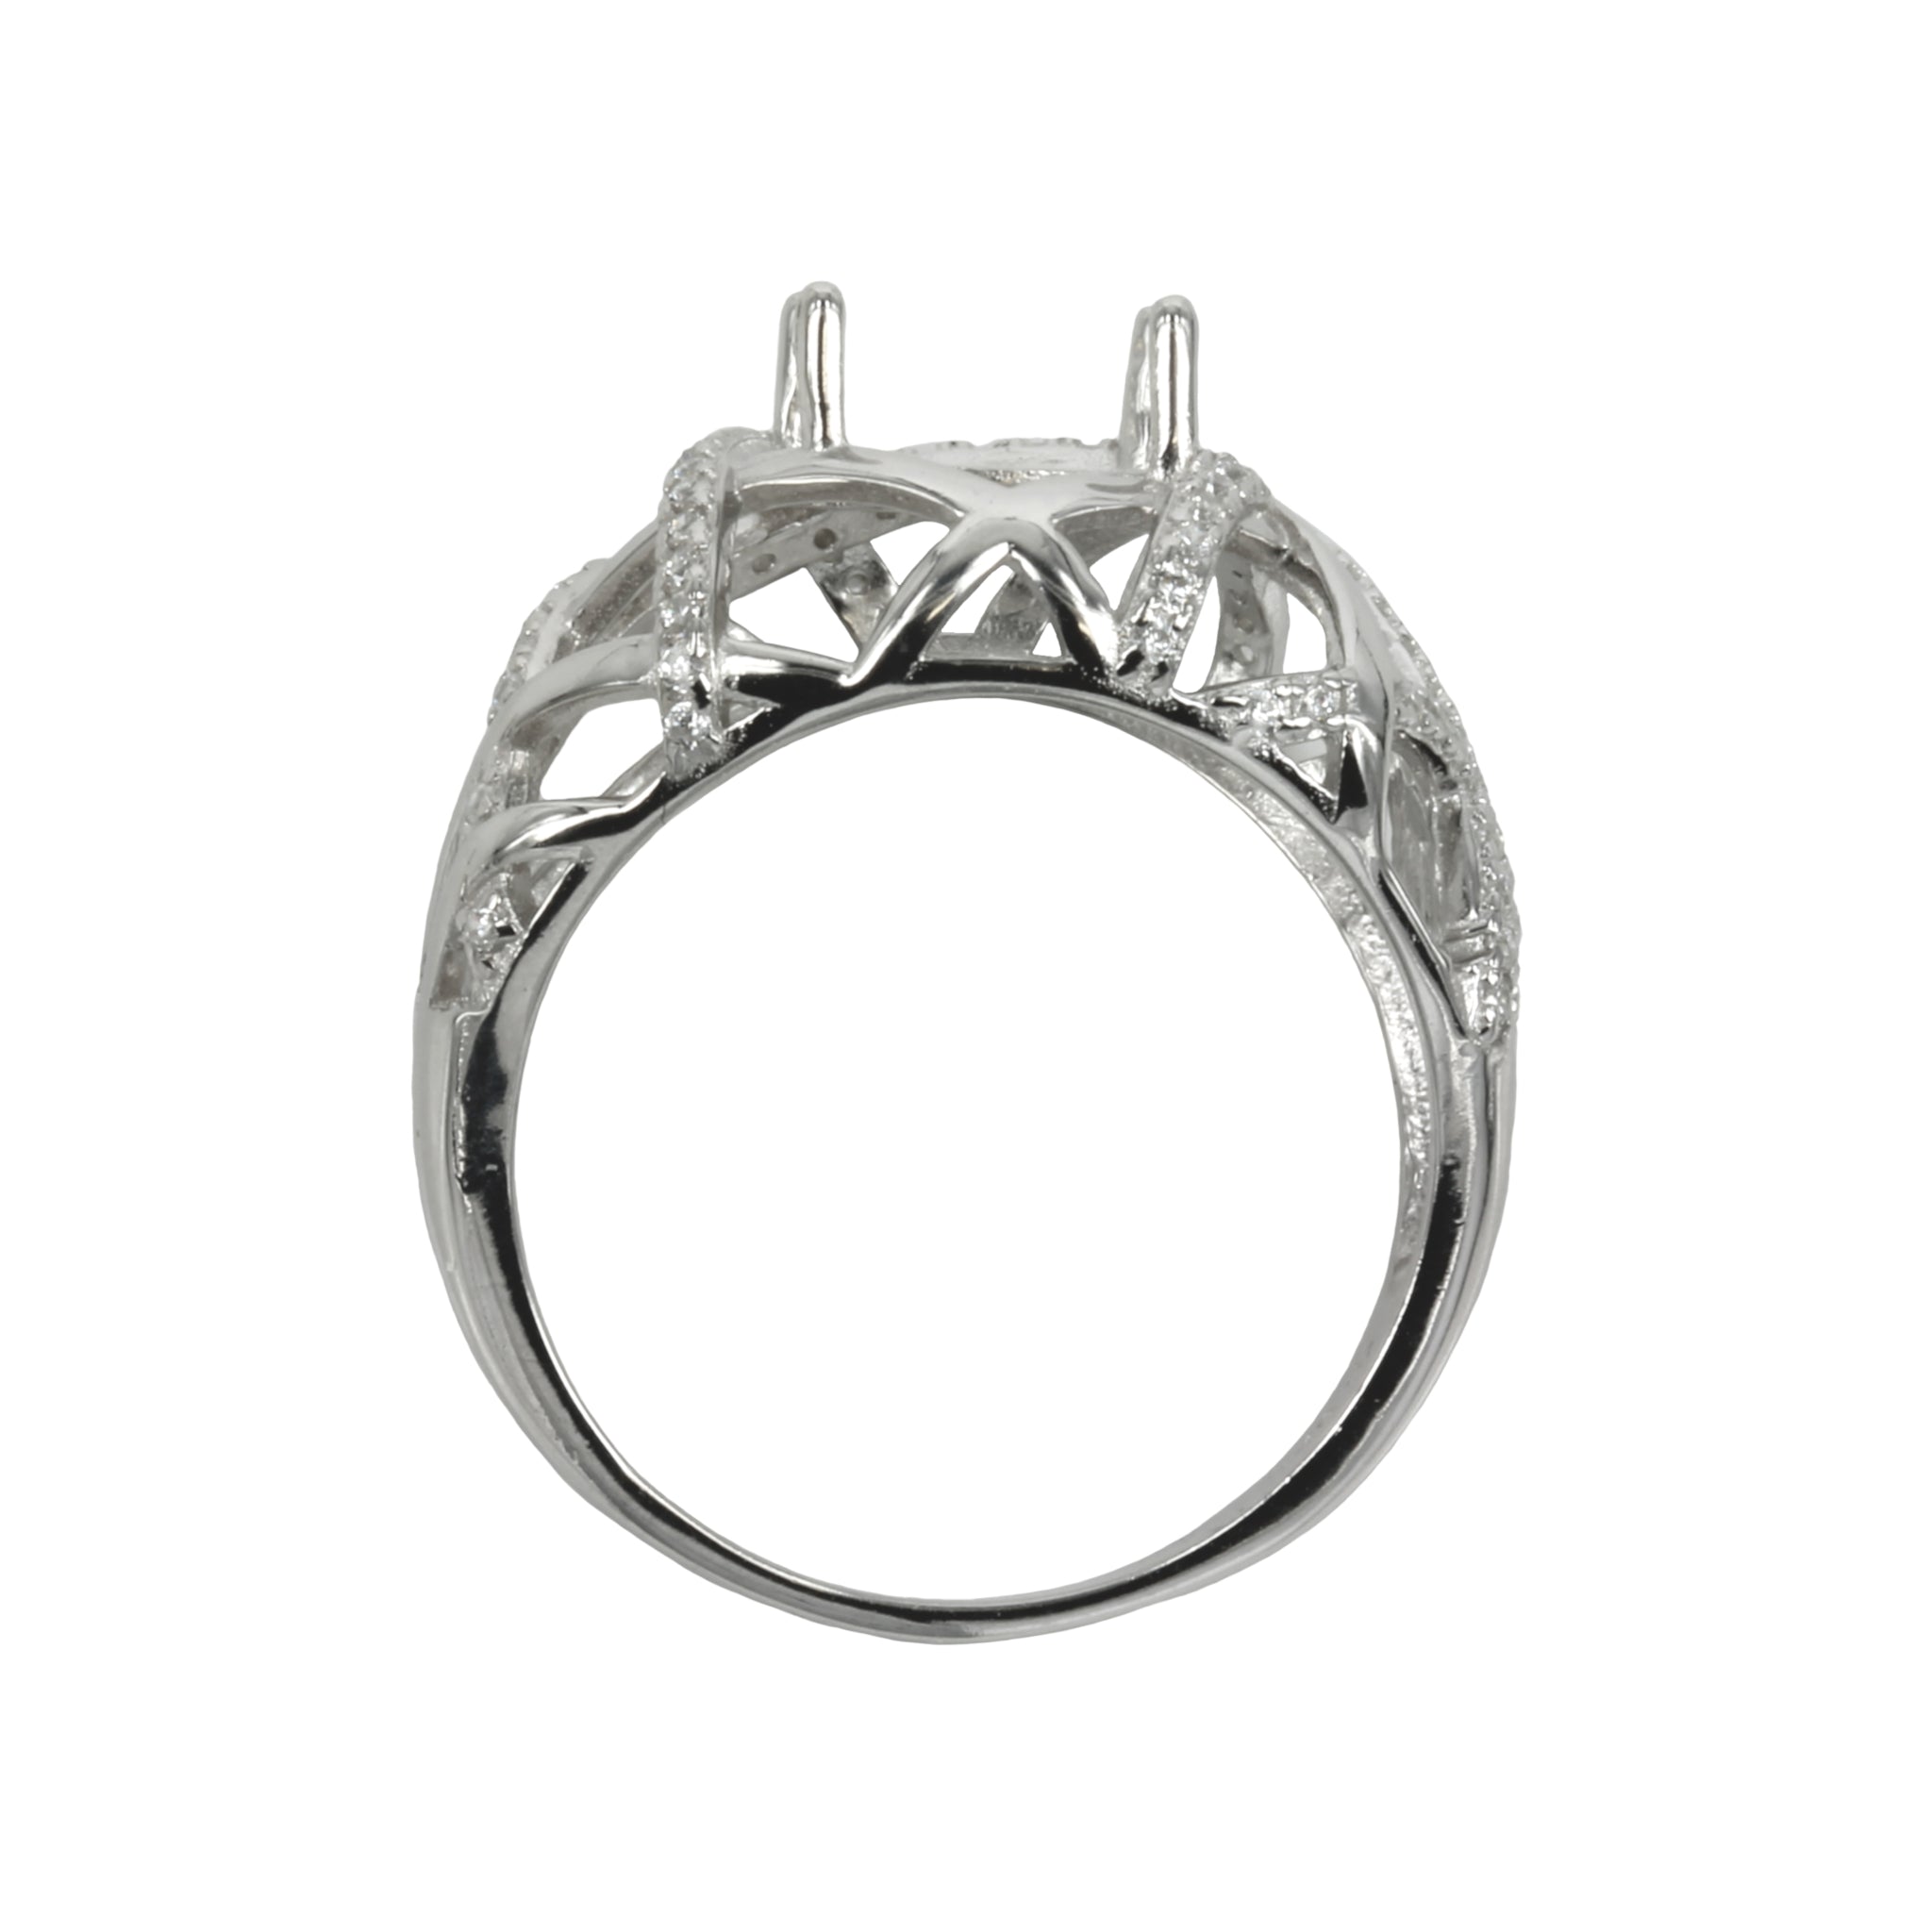 Patterned Ring Setting with CZ's and Round Prongs Mounting in Sterling Silver 9mm